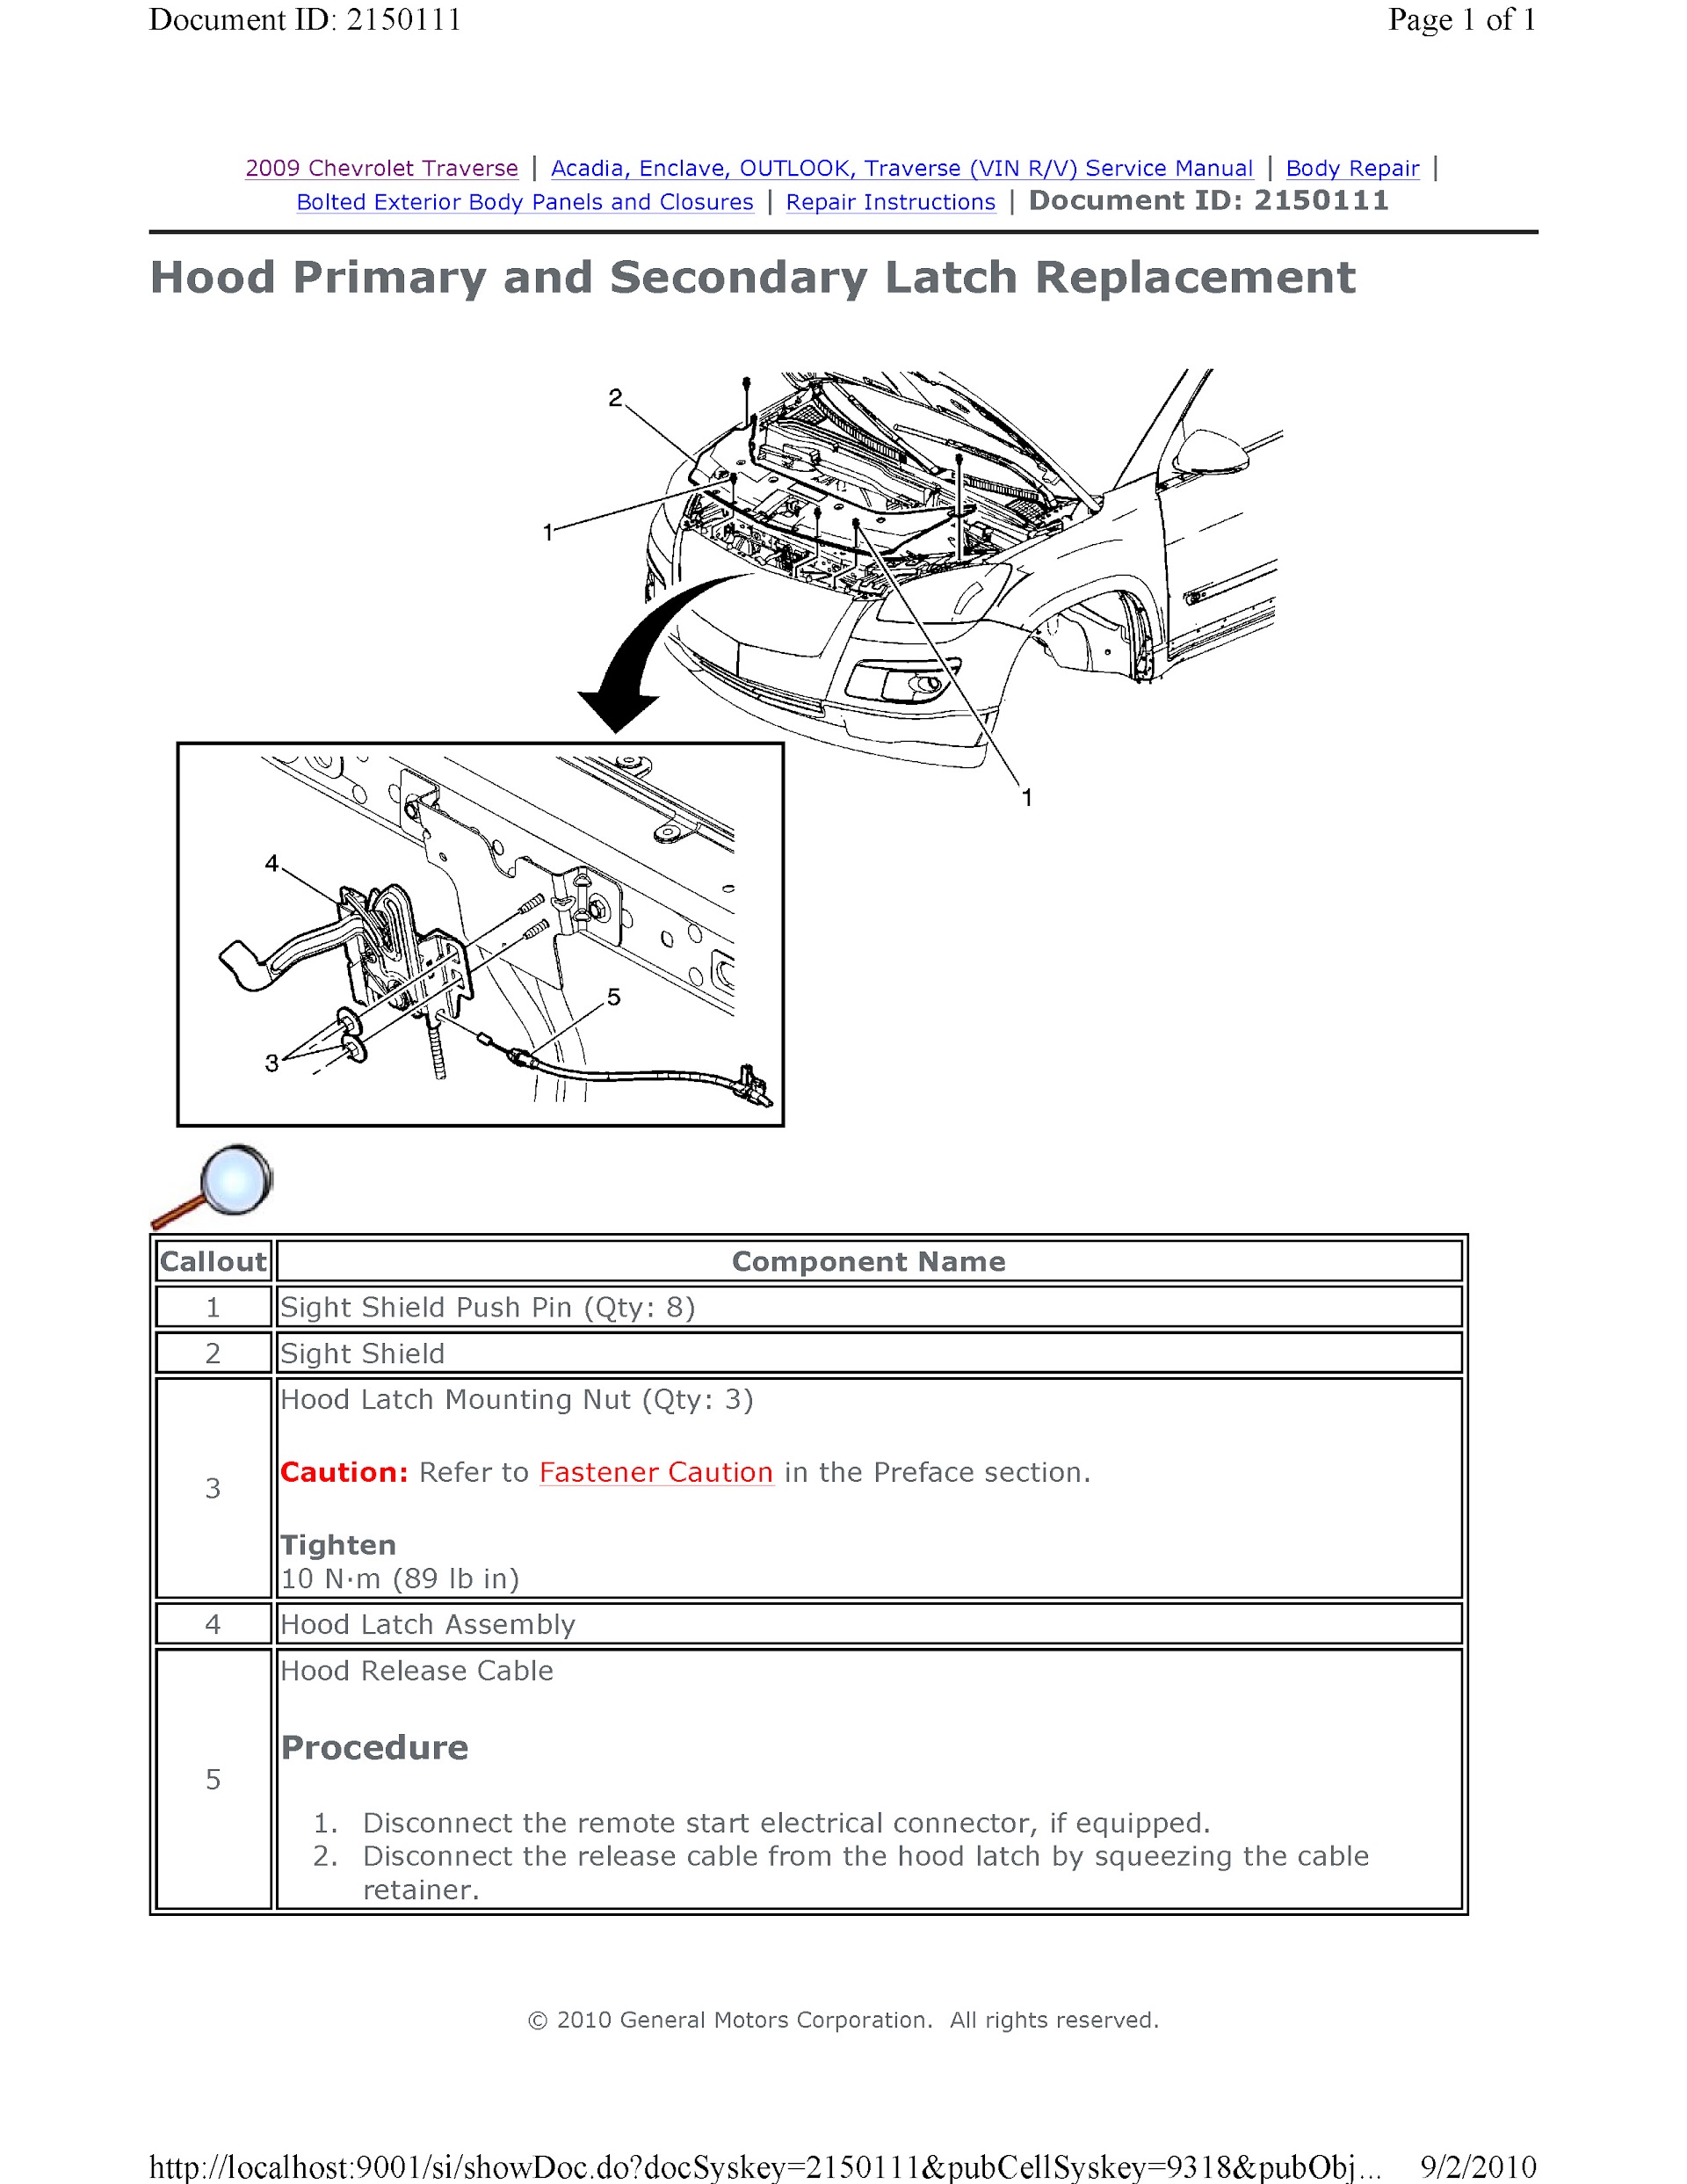 CONTENTS: 2009-2010 Chevrolet Traverse Repair Manual, Hood Primary and Secondary Latch Repalcement